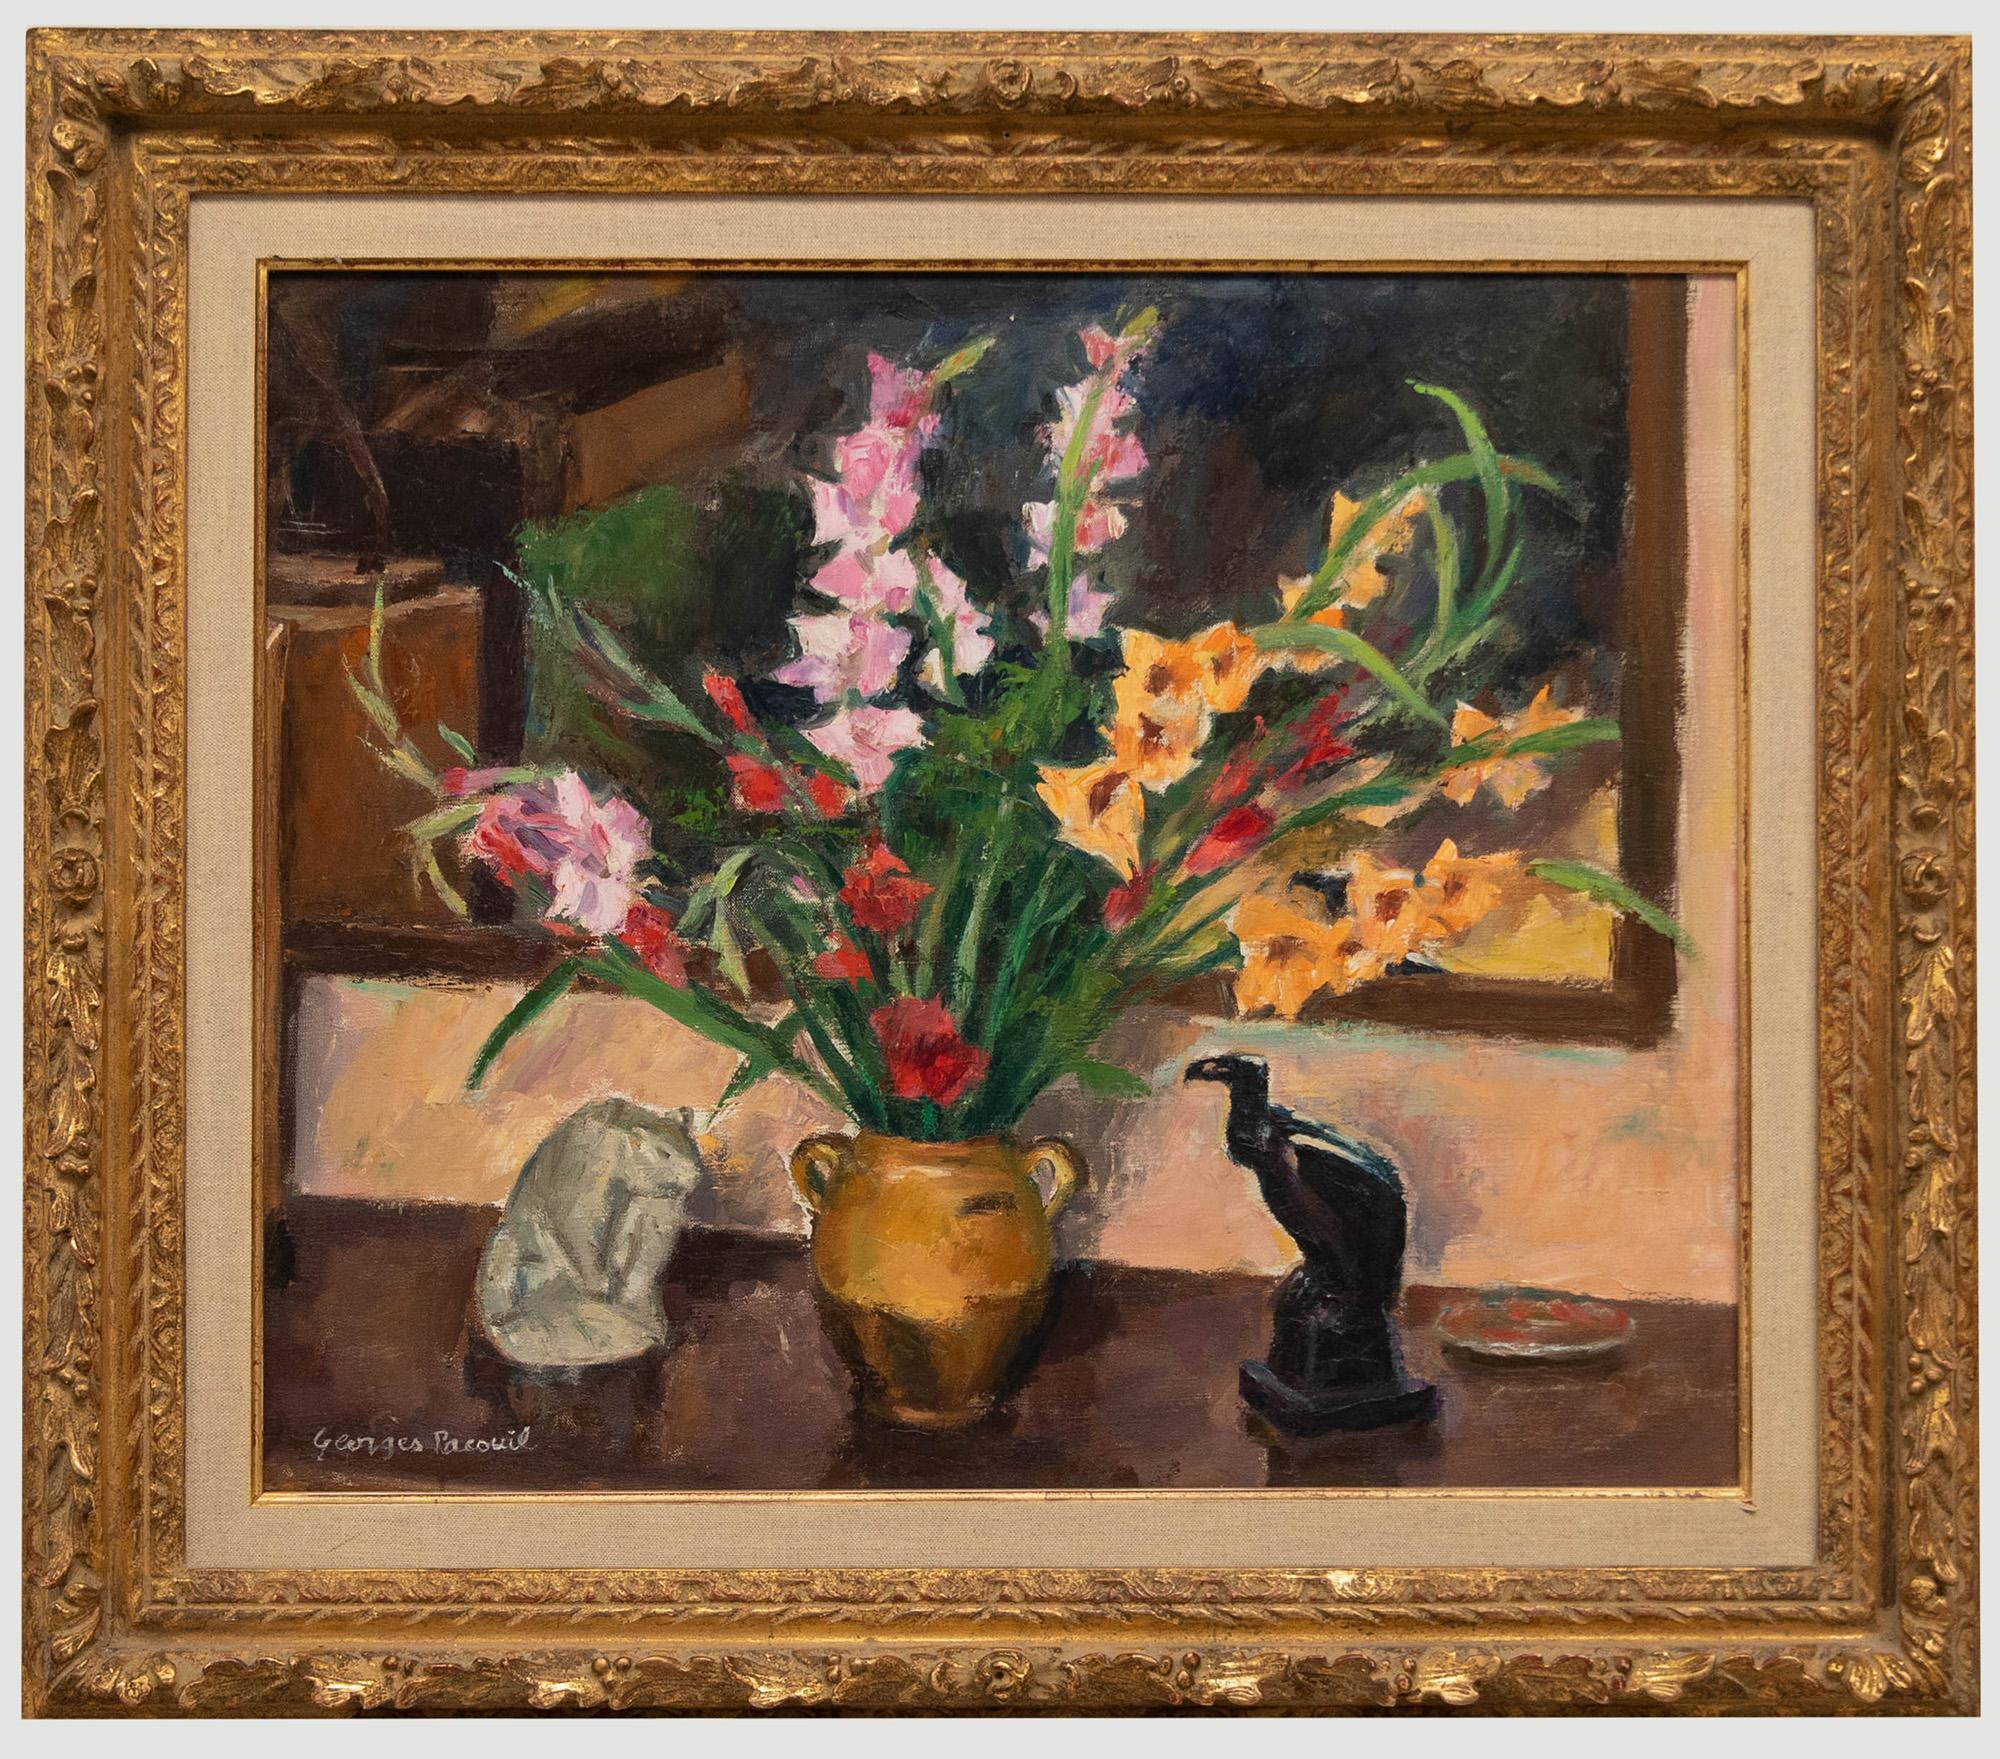 Unknown Still-Life Painting - Georges Pacouil (1903-1996) - Mid 20th Century Oil, Gladioli